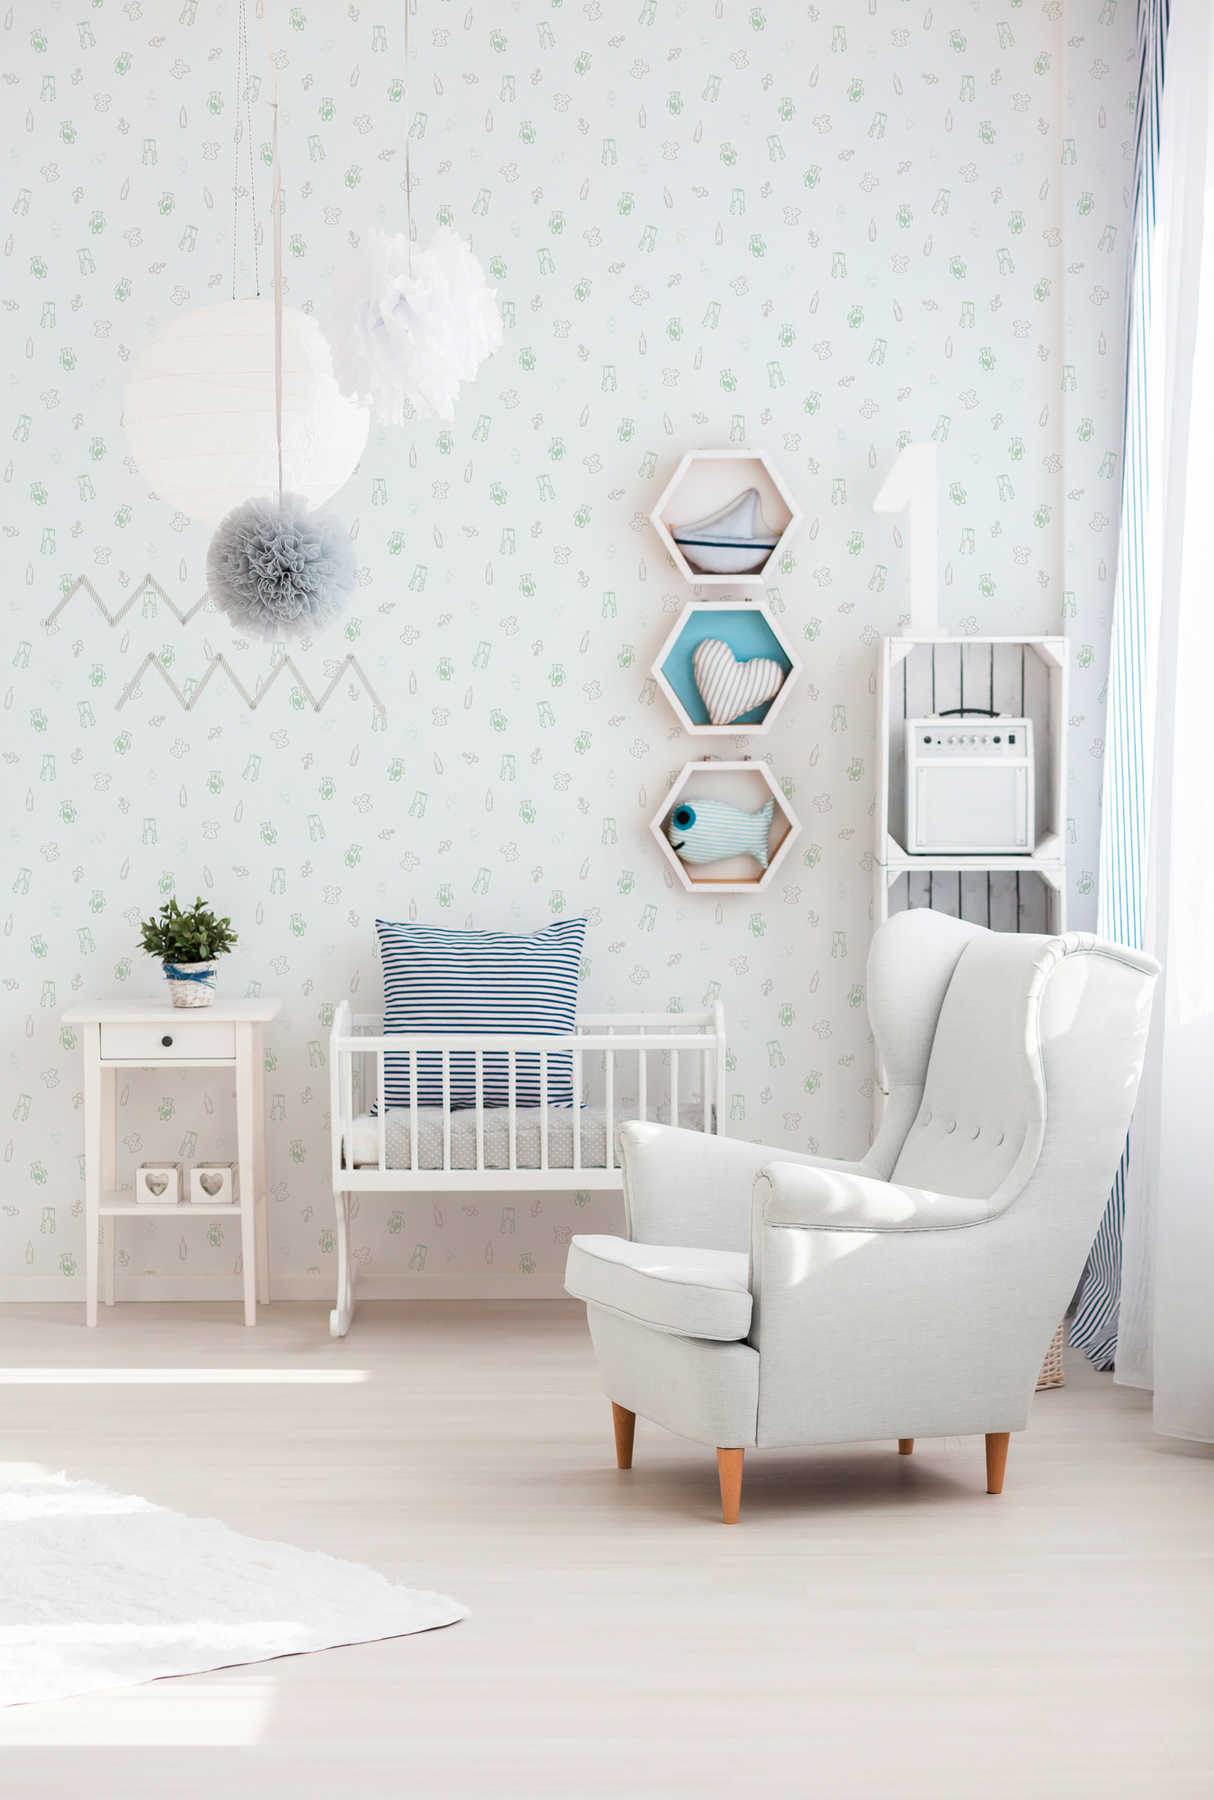             cute baby room wallpaper with children pattern - white, green
        